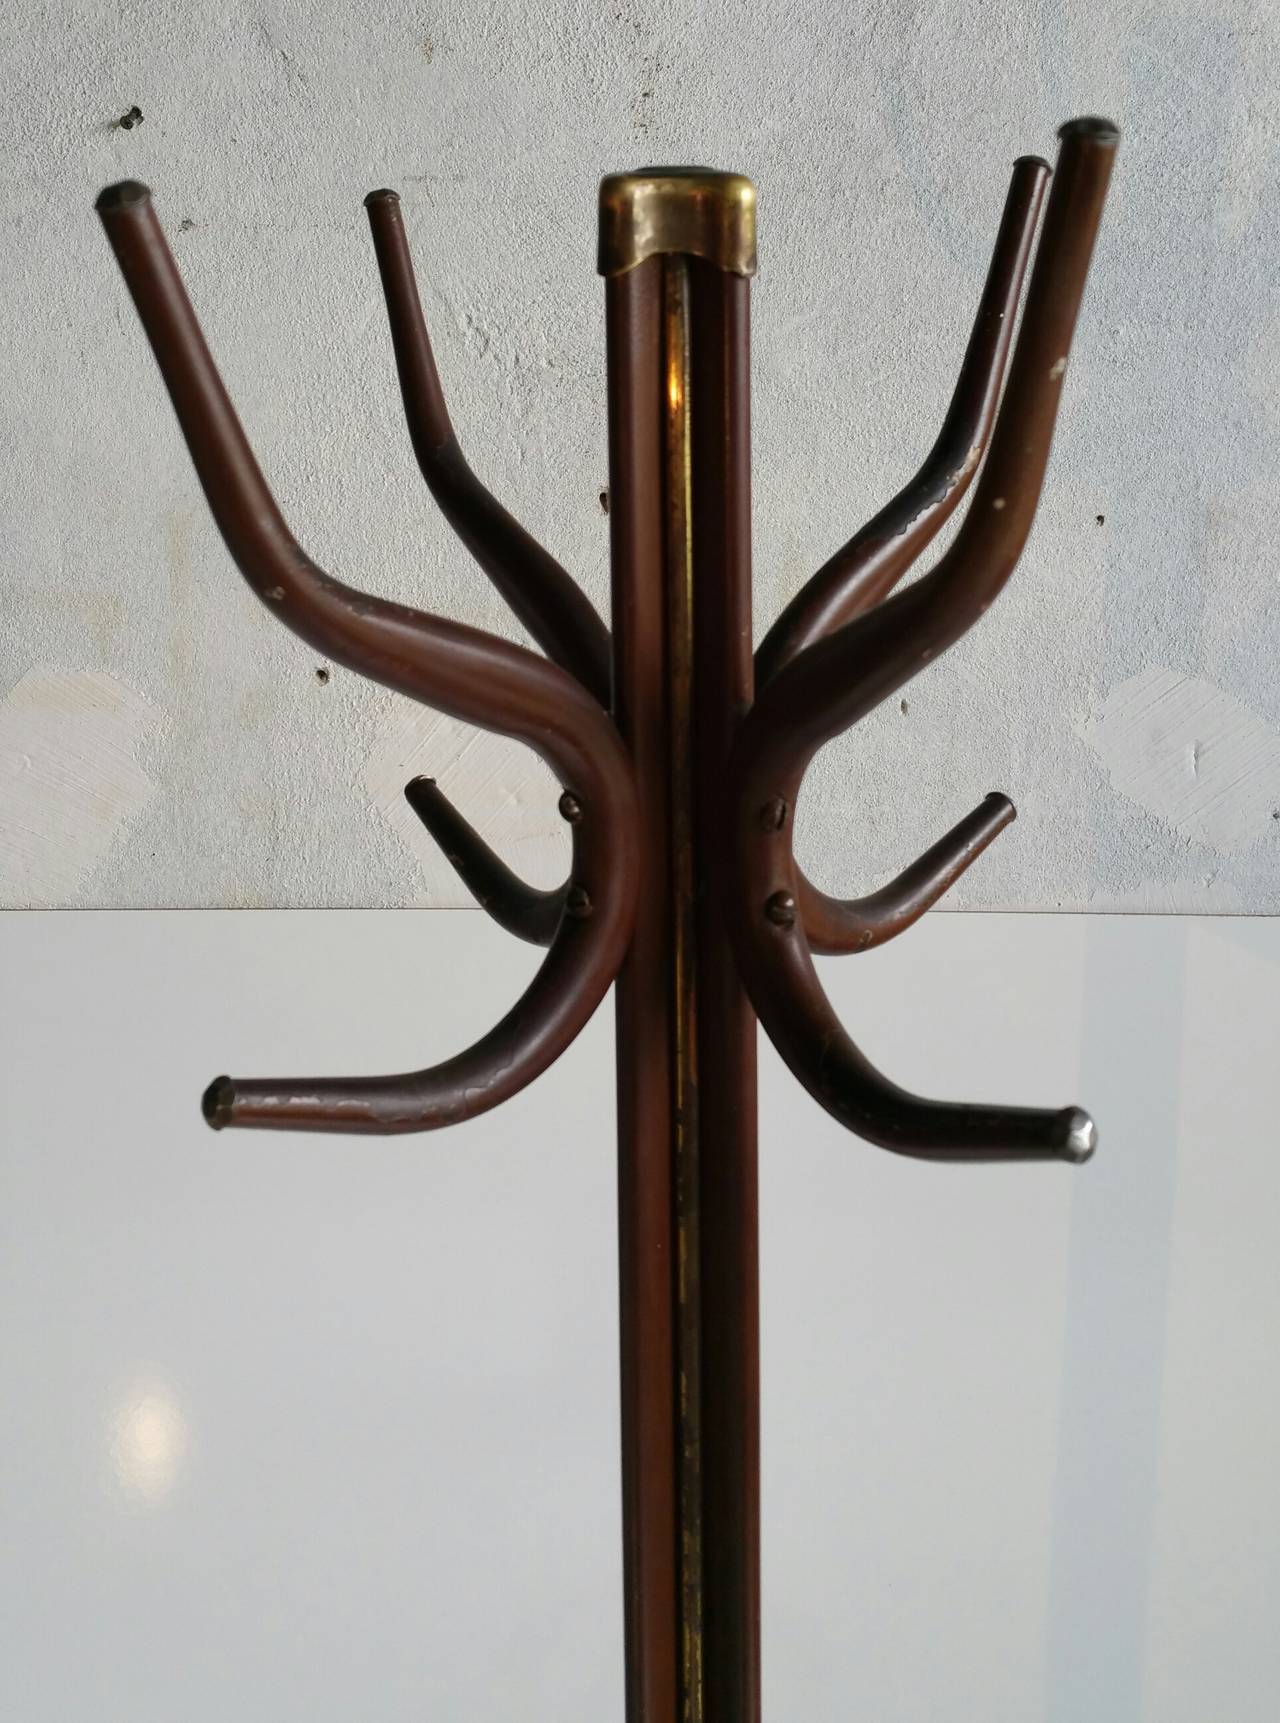 Unusual steel and mixed metal coat stand, Industrial, yet sleek and elegant. Amazing detailing, brass hammered top finial as well as brass striping applied to standard. Beautiful detailed silvered faceted ends to end hooks, also designed steel